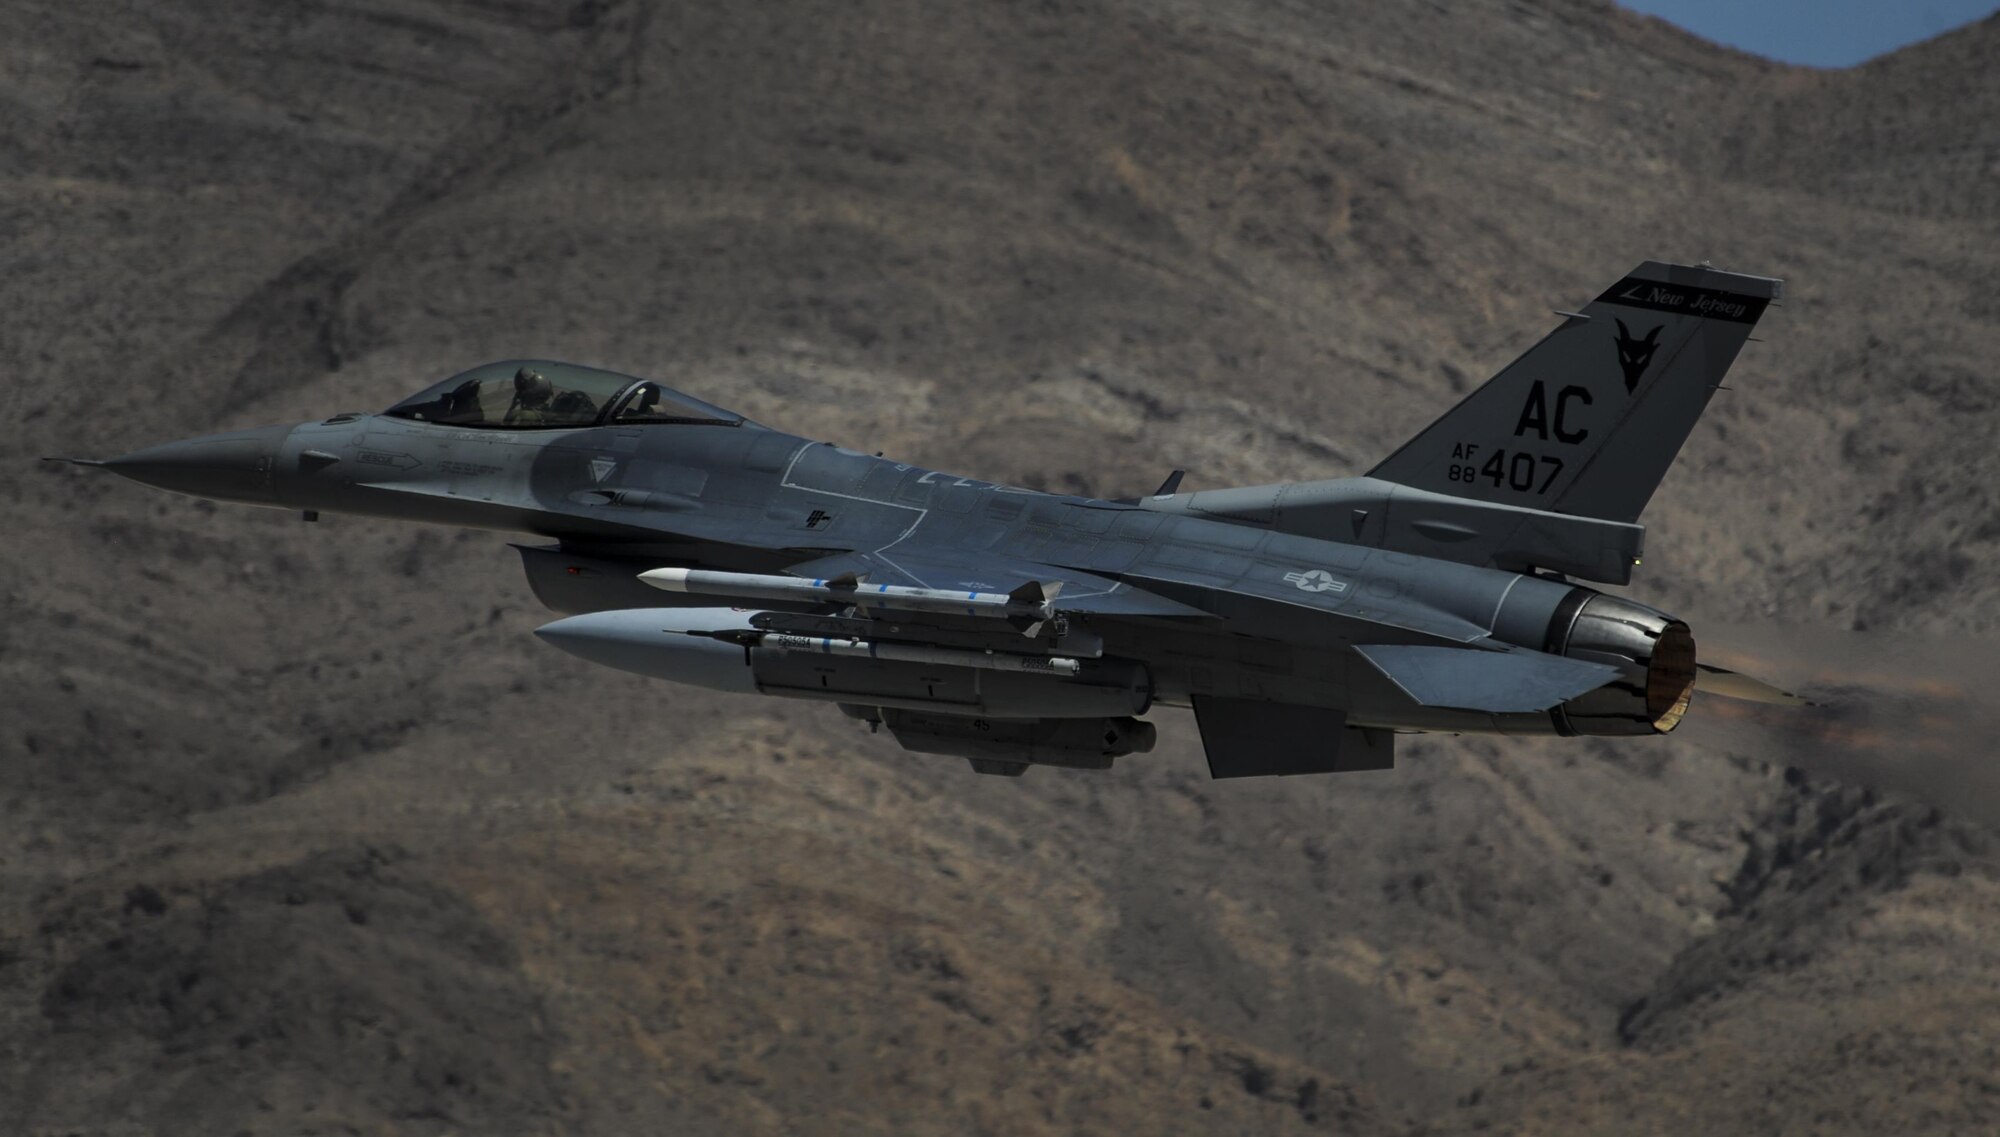 An F-16C, assigned to the 119th Fighter Squadron, Atlantic City Air National Guard Base, N.J., takes off on the first day of Red Flag 16-3 at Nellis Air Force Base, Nev., July 11, 2016. Red Flag is a realistic combat exercise involving multiple military branches conducting training operations on the 15,000 square mile Nevada Test and Training Range. (U.S. Air Force photo by Airman 1st Class Kevin Tanenbaum/Released)